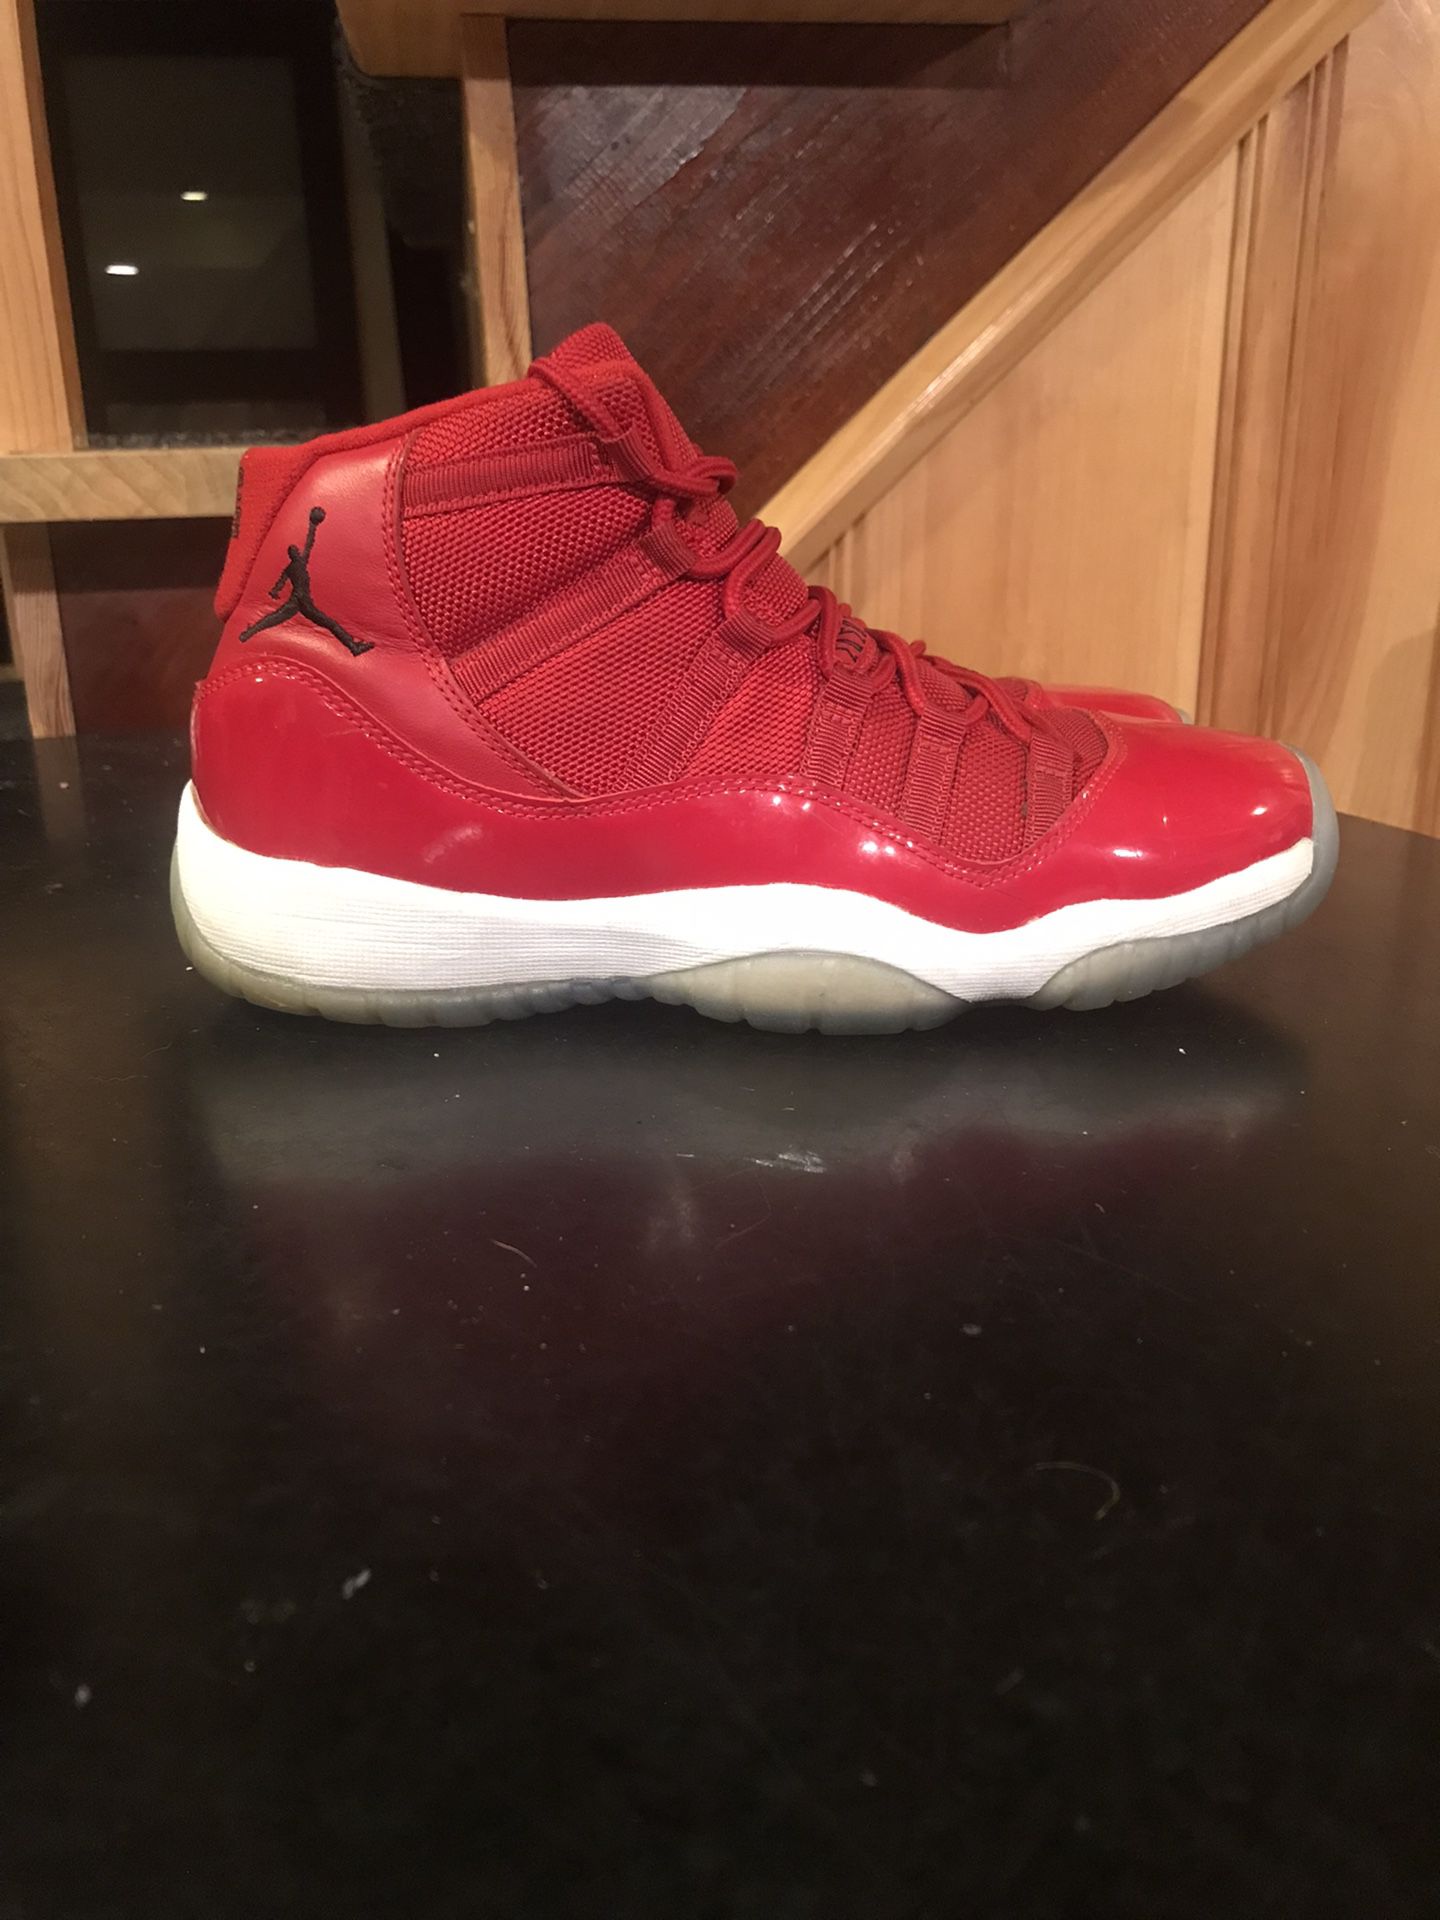 Red 11s Size 6.5